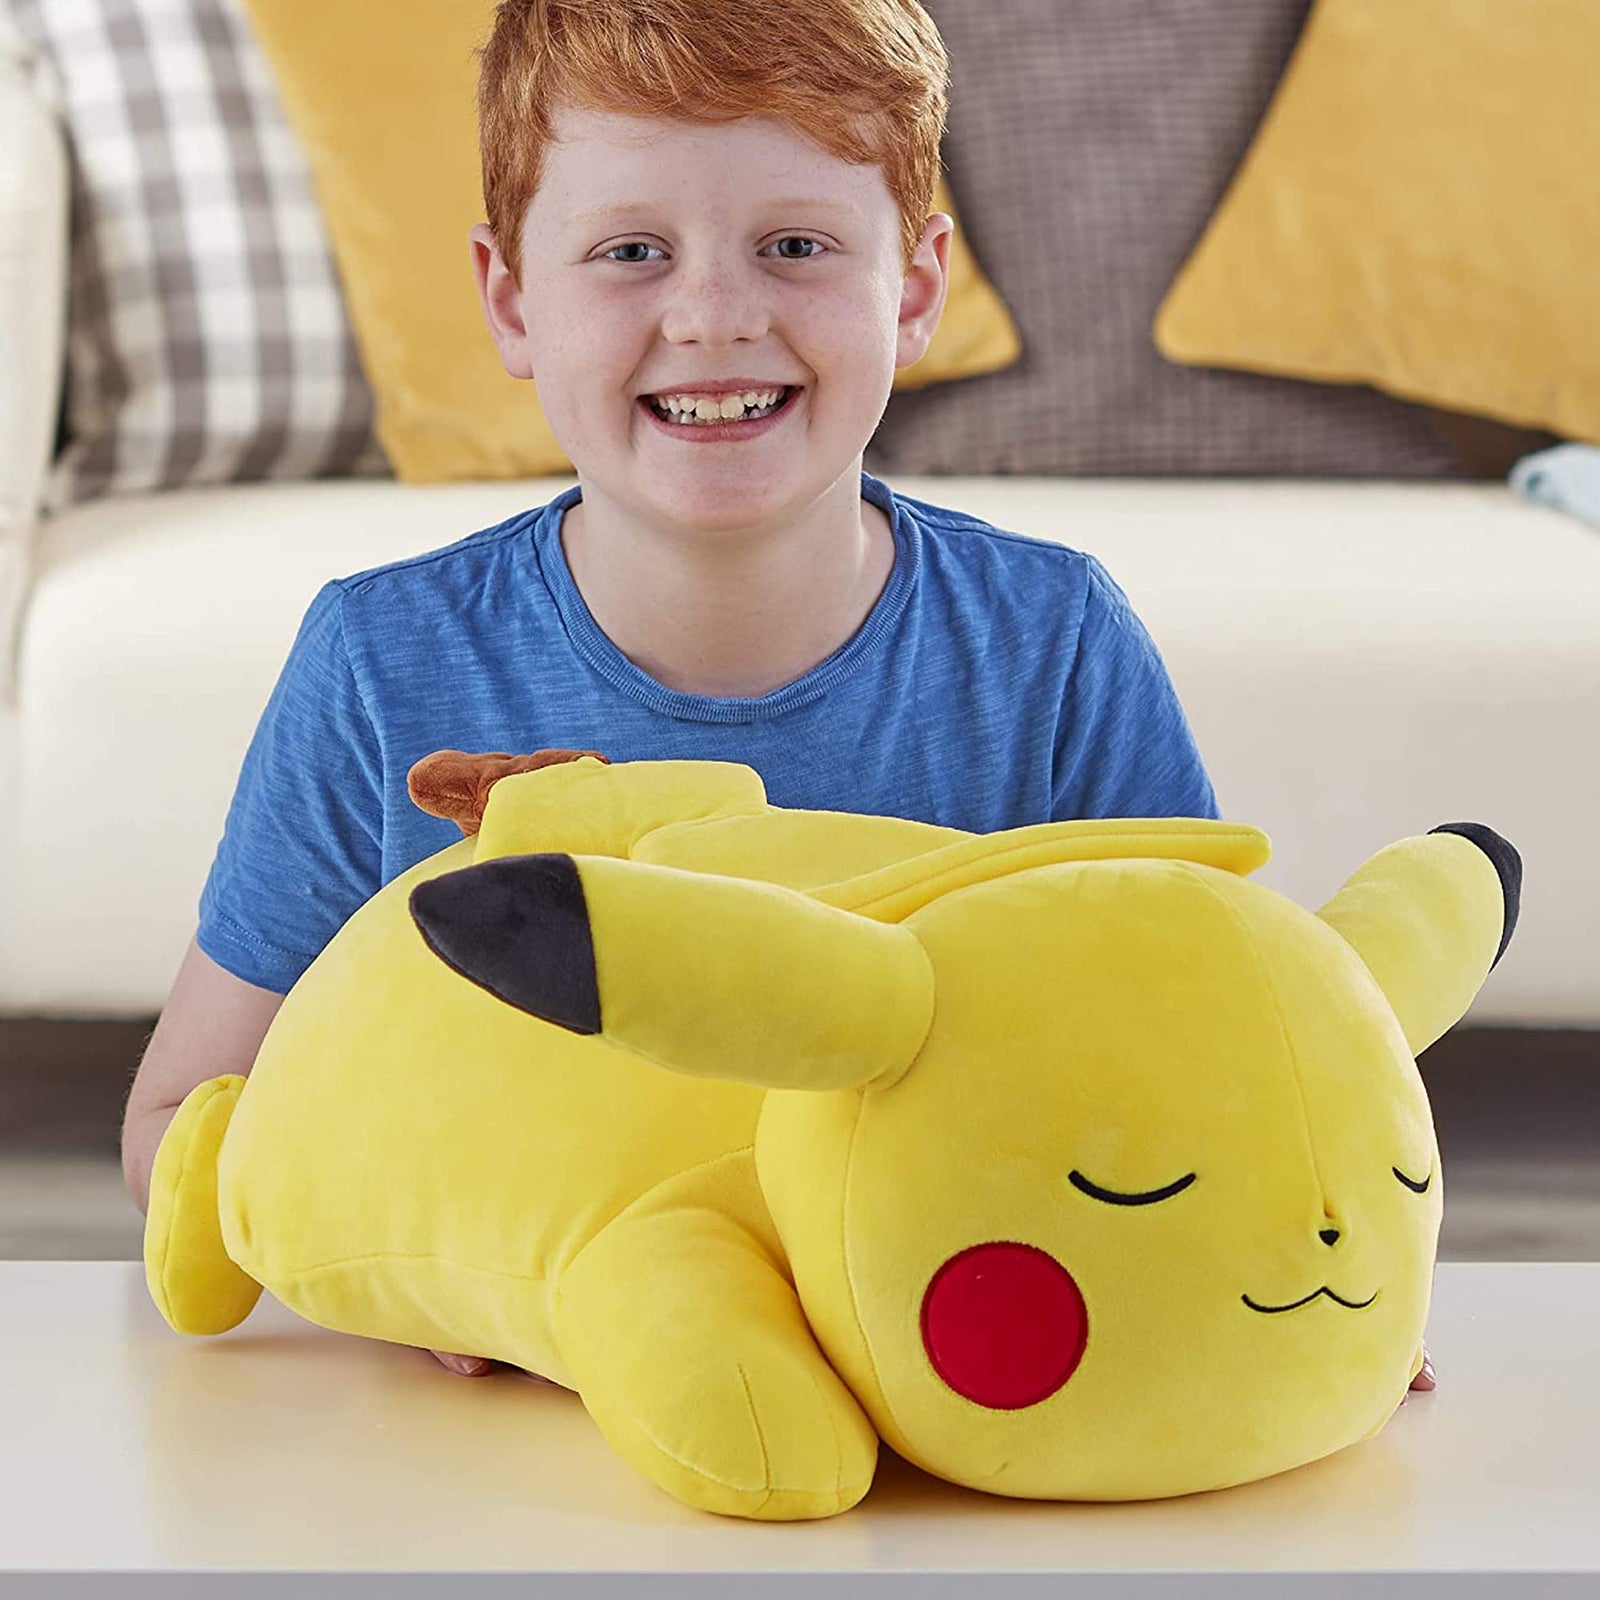 Pokemon 18” Plush Sleeping Pikachu - Cuddly Must Have Fans - Plush Perfect for Traveling, Car Rides, Nap Time, and Play Time!